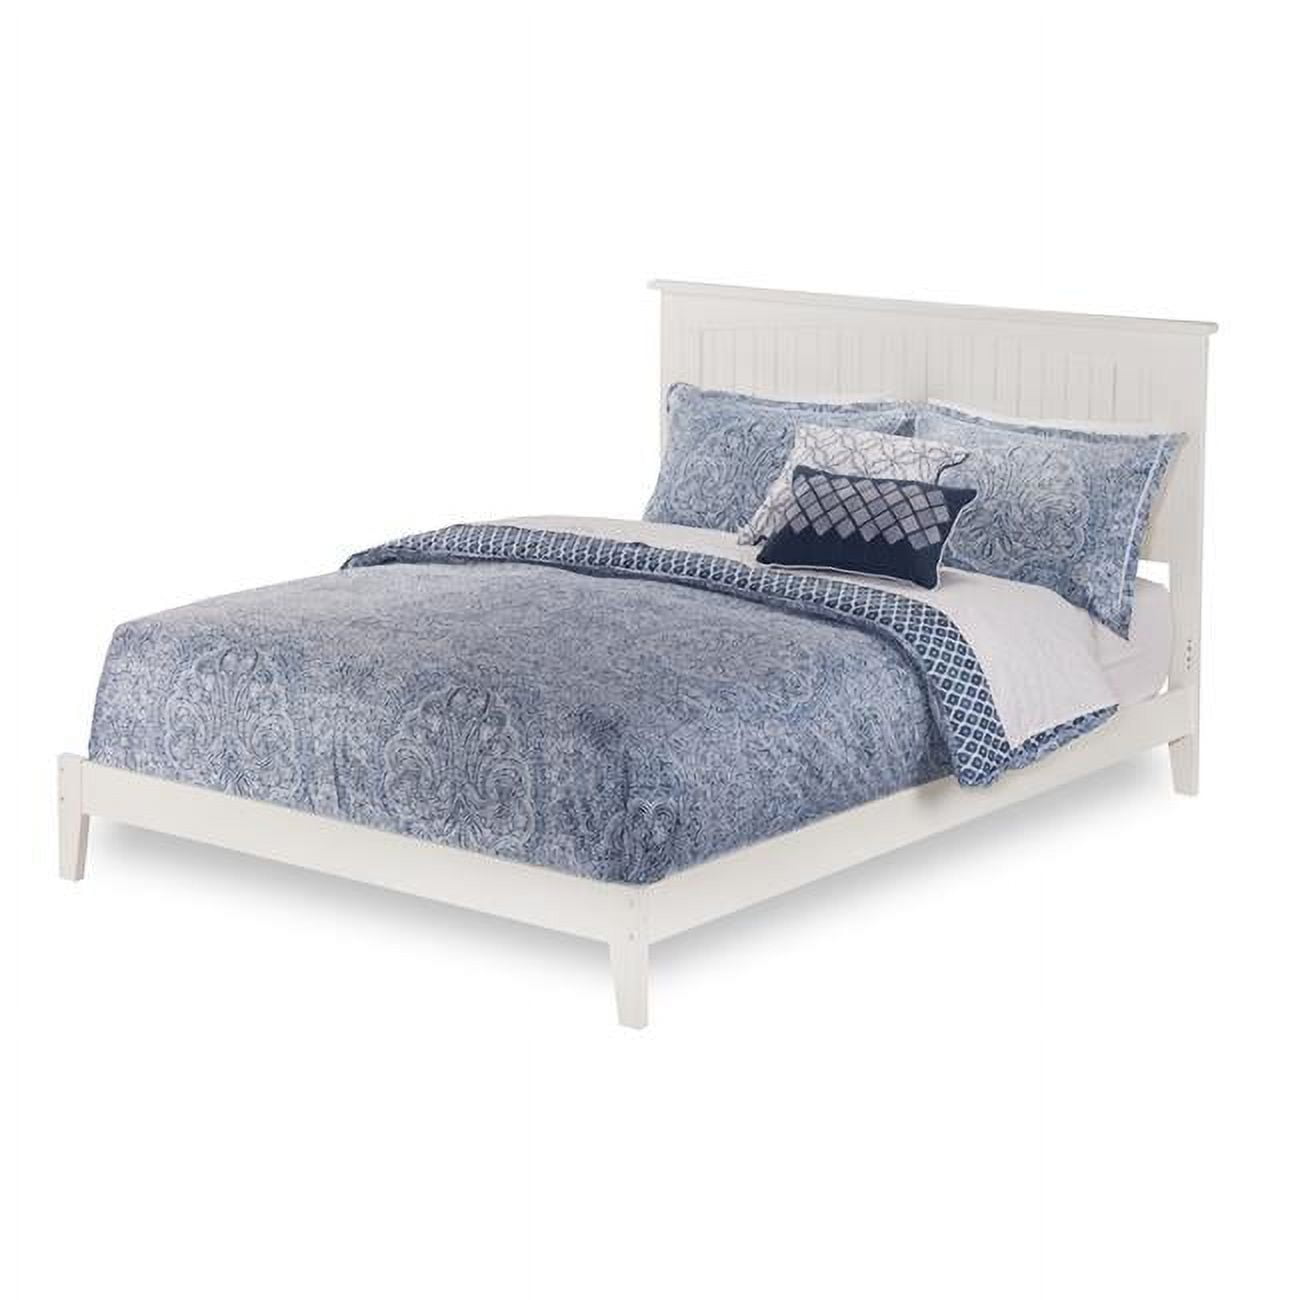 Picture of Atlantic Furniture AR8251002 Nantucket with Open Foot - White, King Size